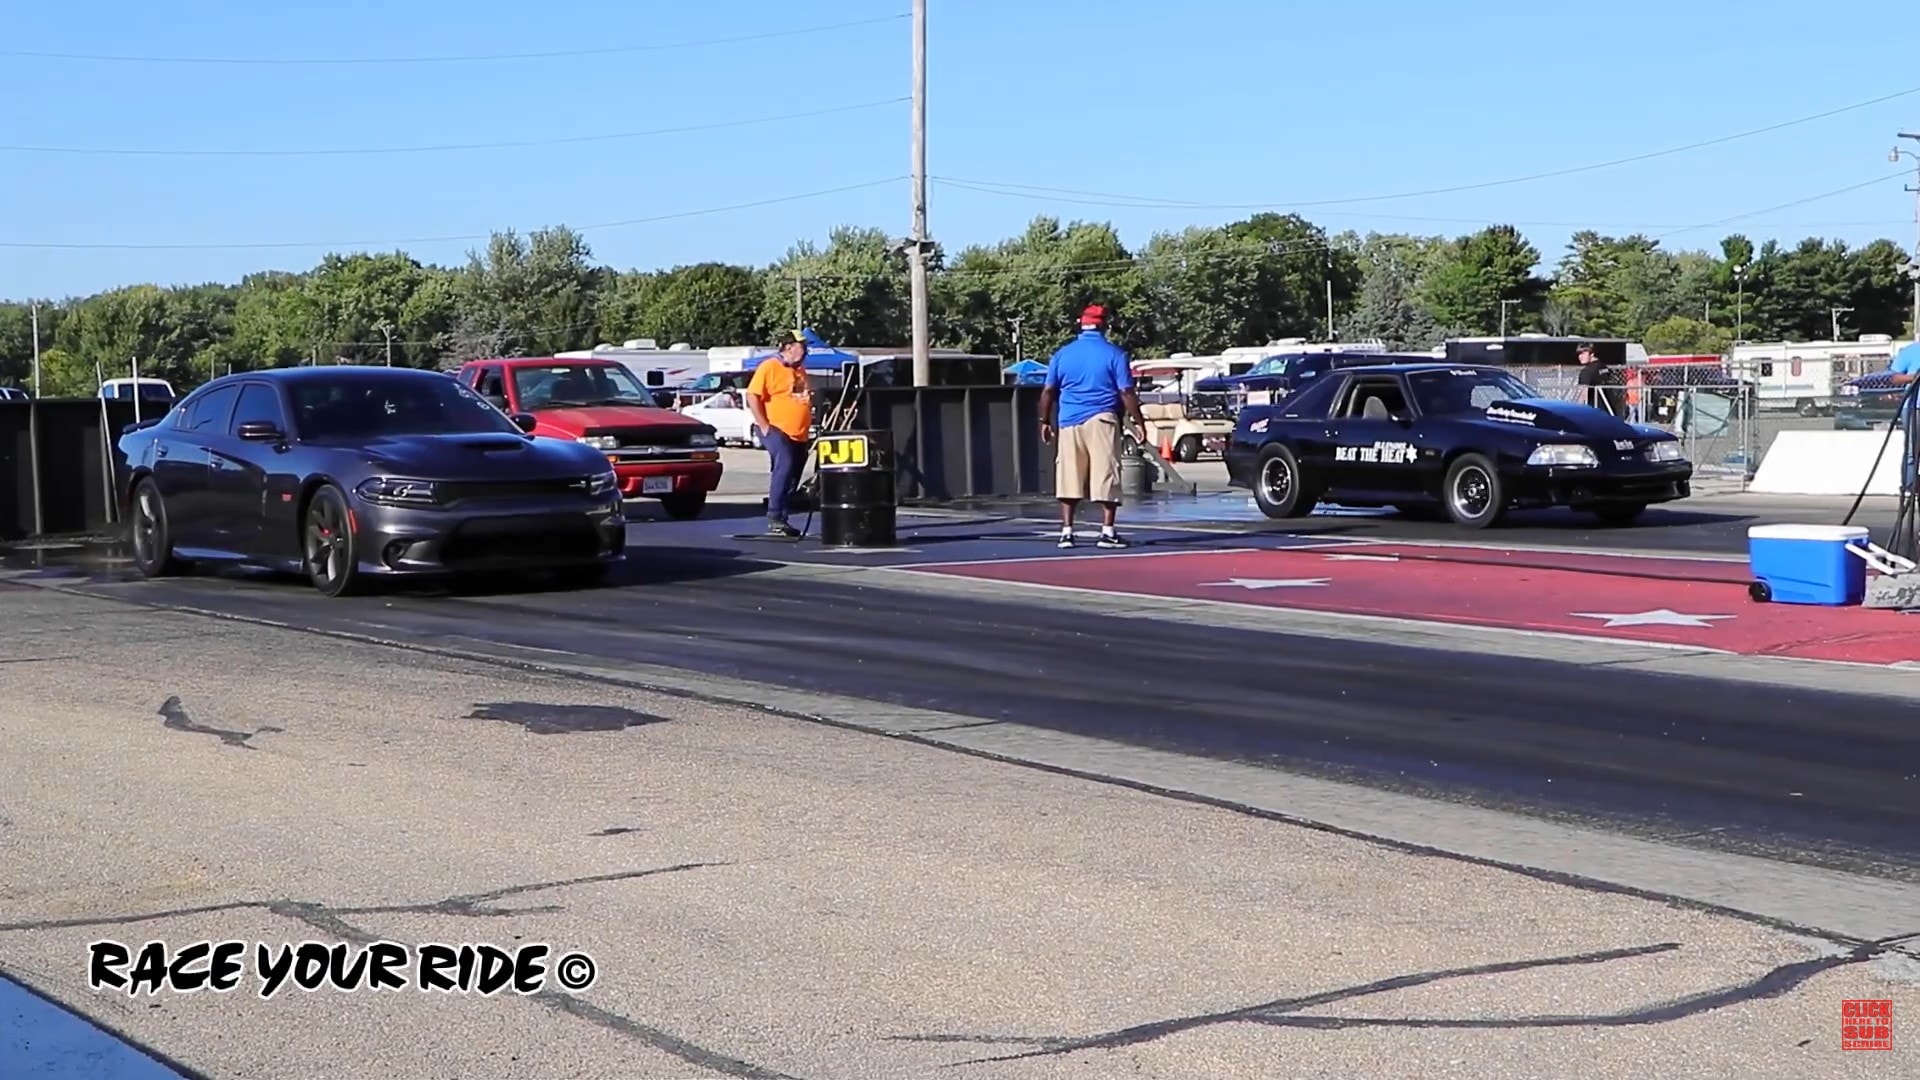 ‘Police’ Ford Mustang GT drags Dodge Charger SRT, Mopar ends up chasing it instead